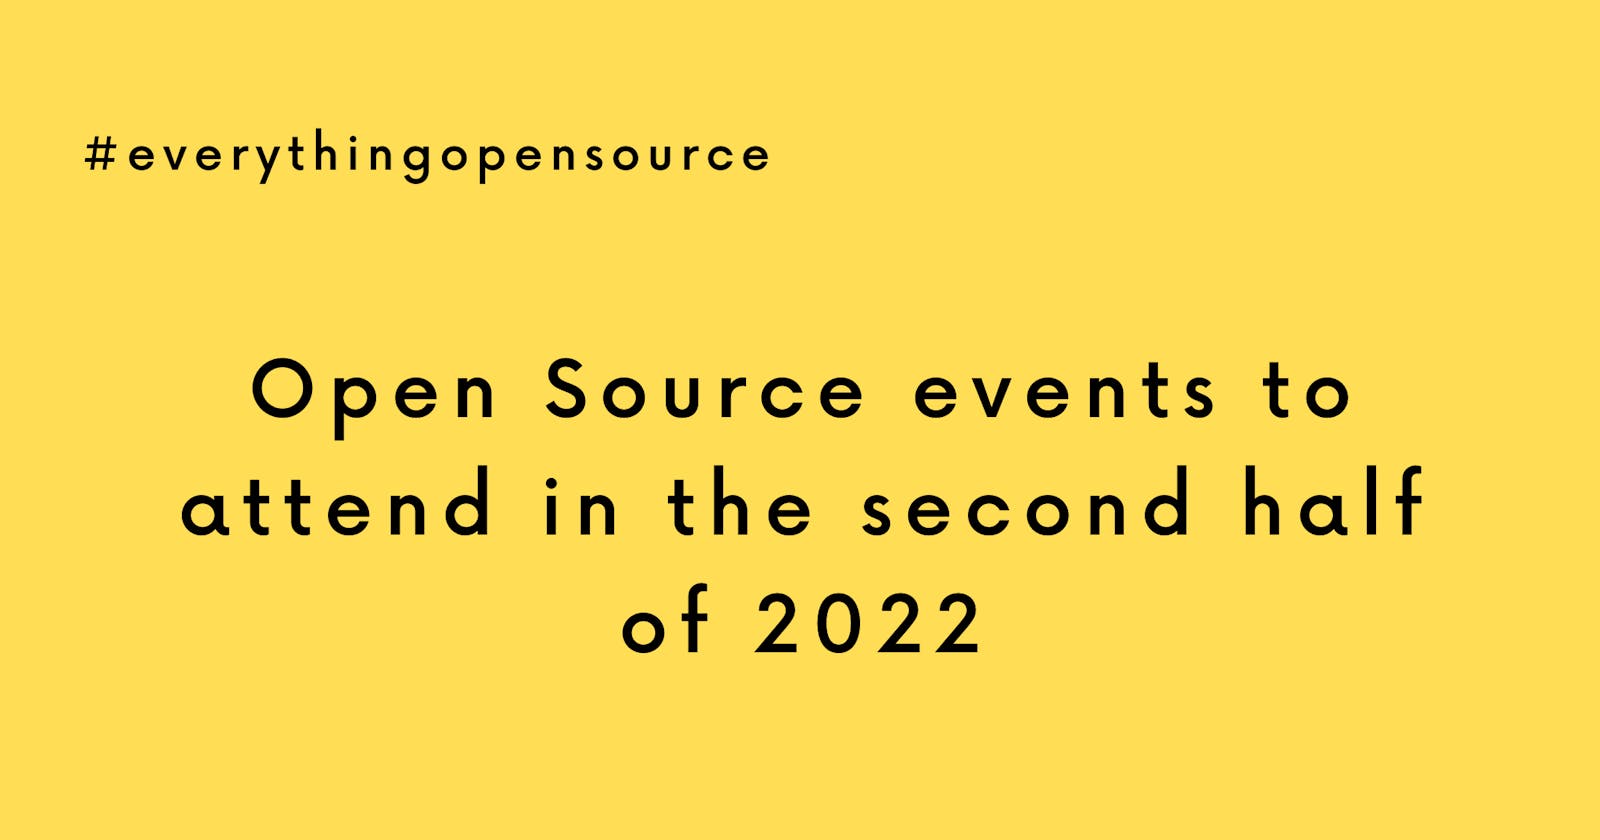 Open Source events to attend in the second half of 2022